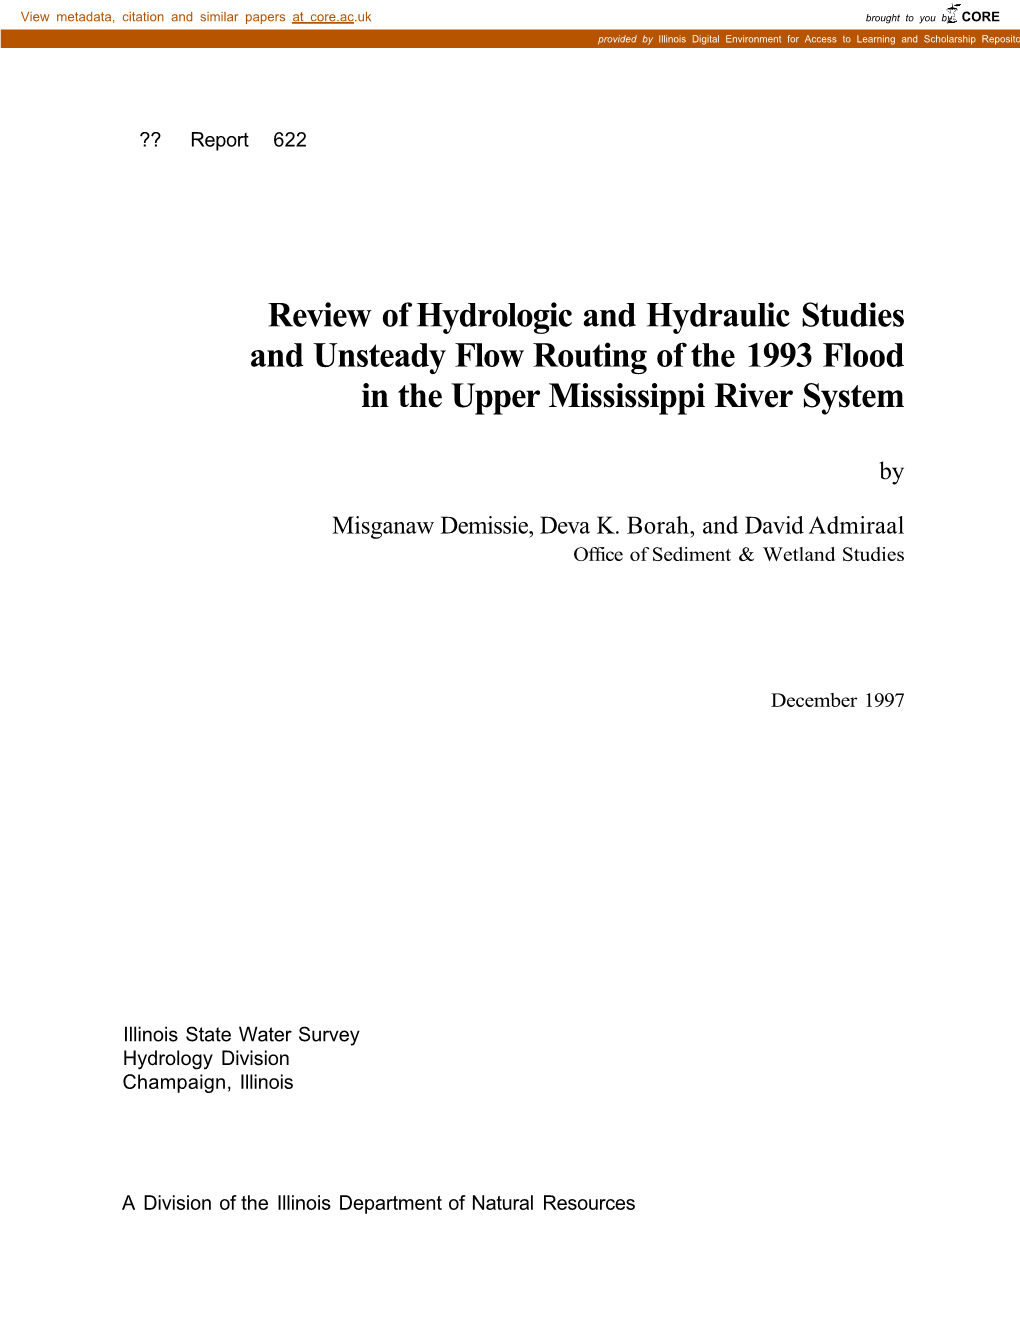 Review of Hydrologic and Hydraulic Studies and Unsteady Flow Routing of the 1993 Flood in the Upper Mississippi River System